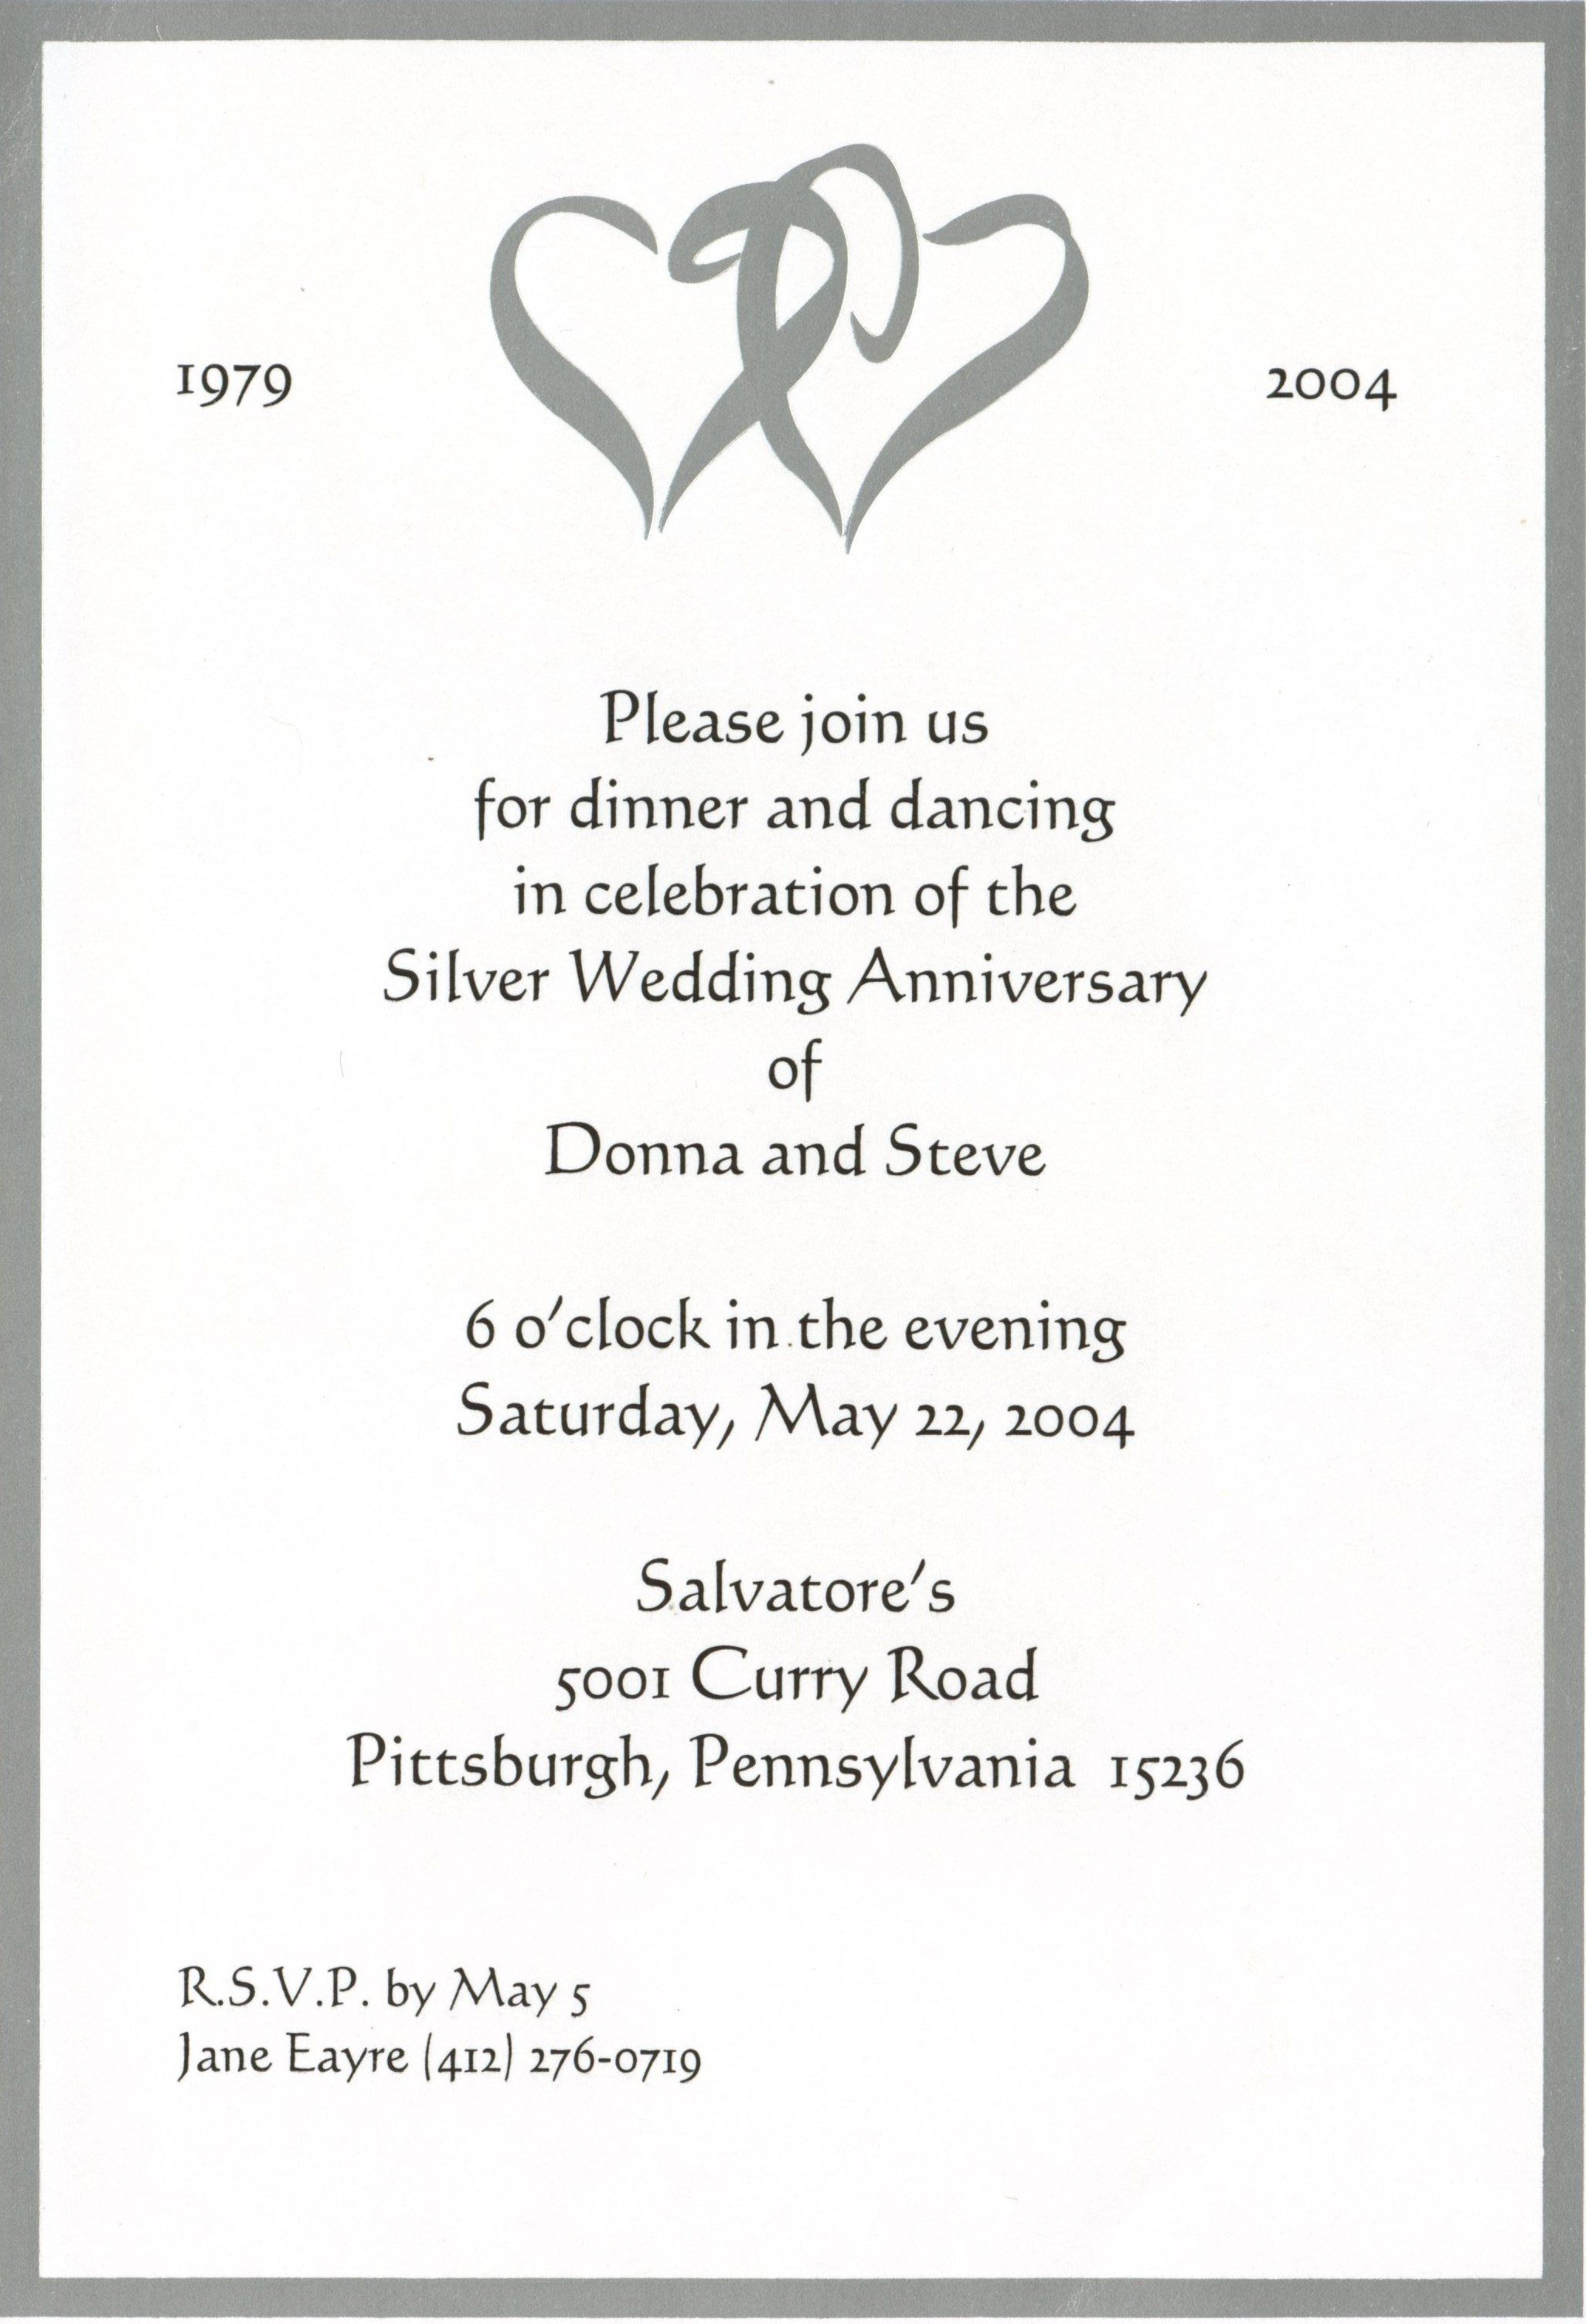 50th Wedding Anniversary Invitation Templates Awesome Signs intended for dimensions 2052 X 3006